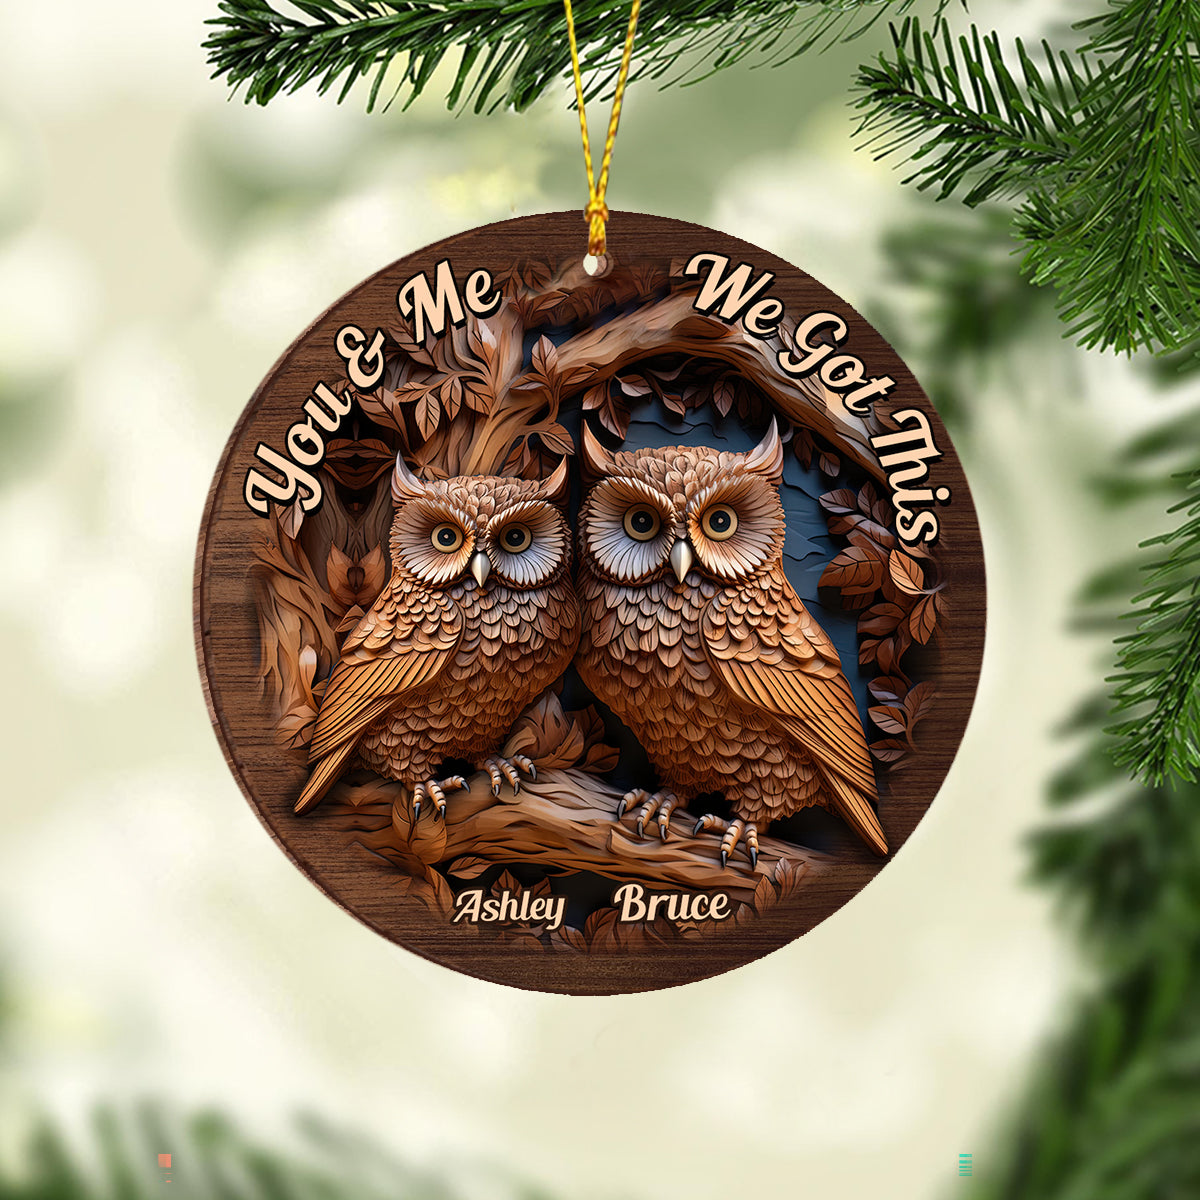 You And Me We Got This - Personalized Owl Ornament